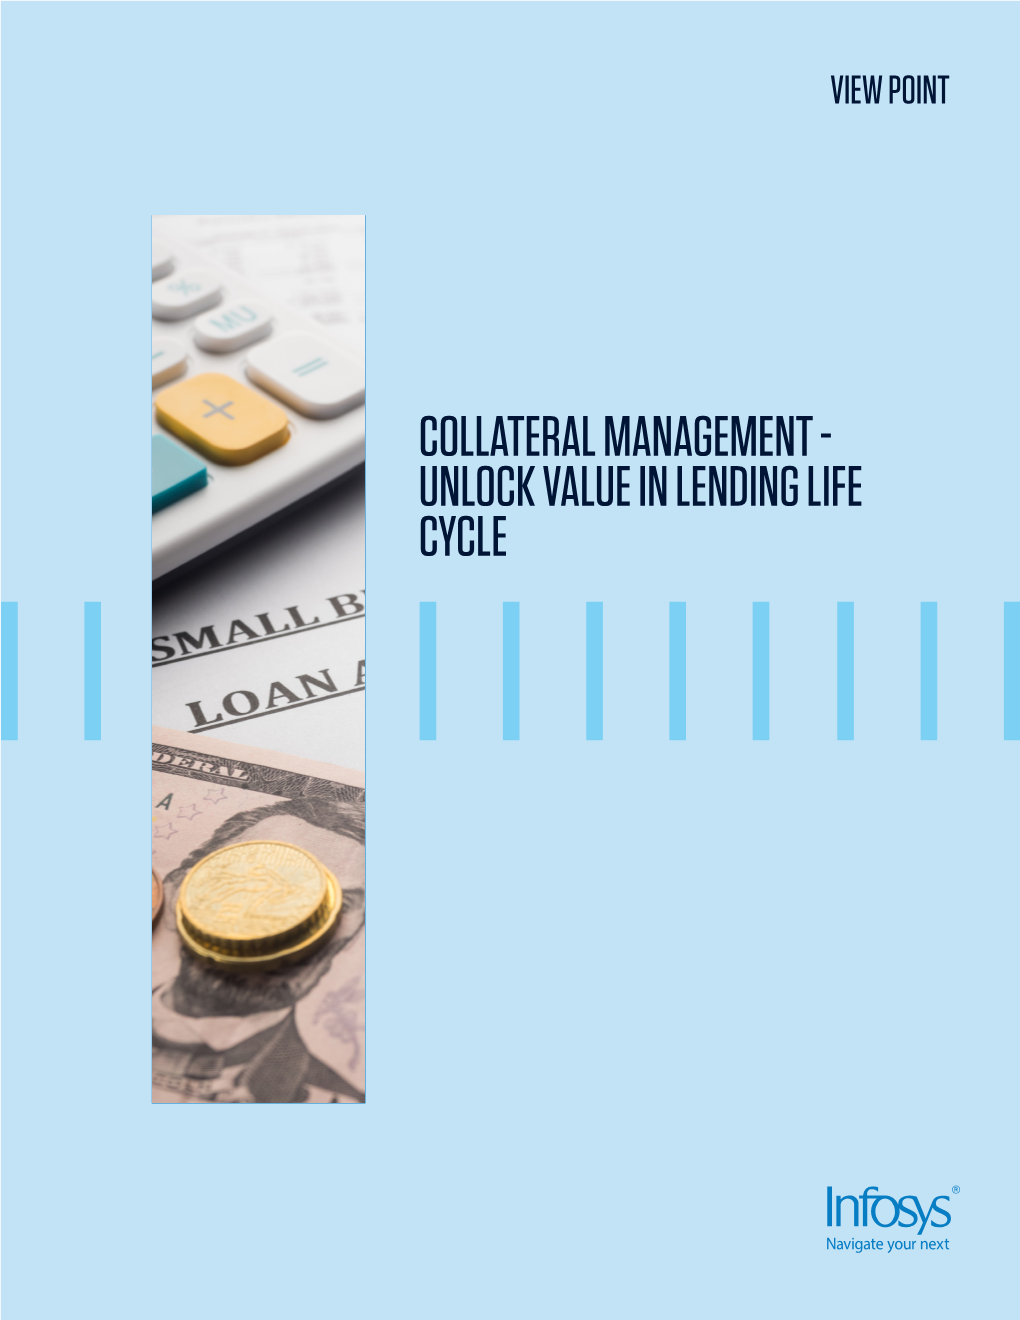 COLLATERAL MANAGEMENT - UNLOCK VALUE in LENDING LIFE CYCLE Introduction